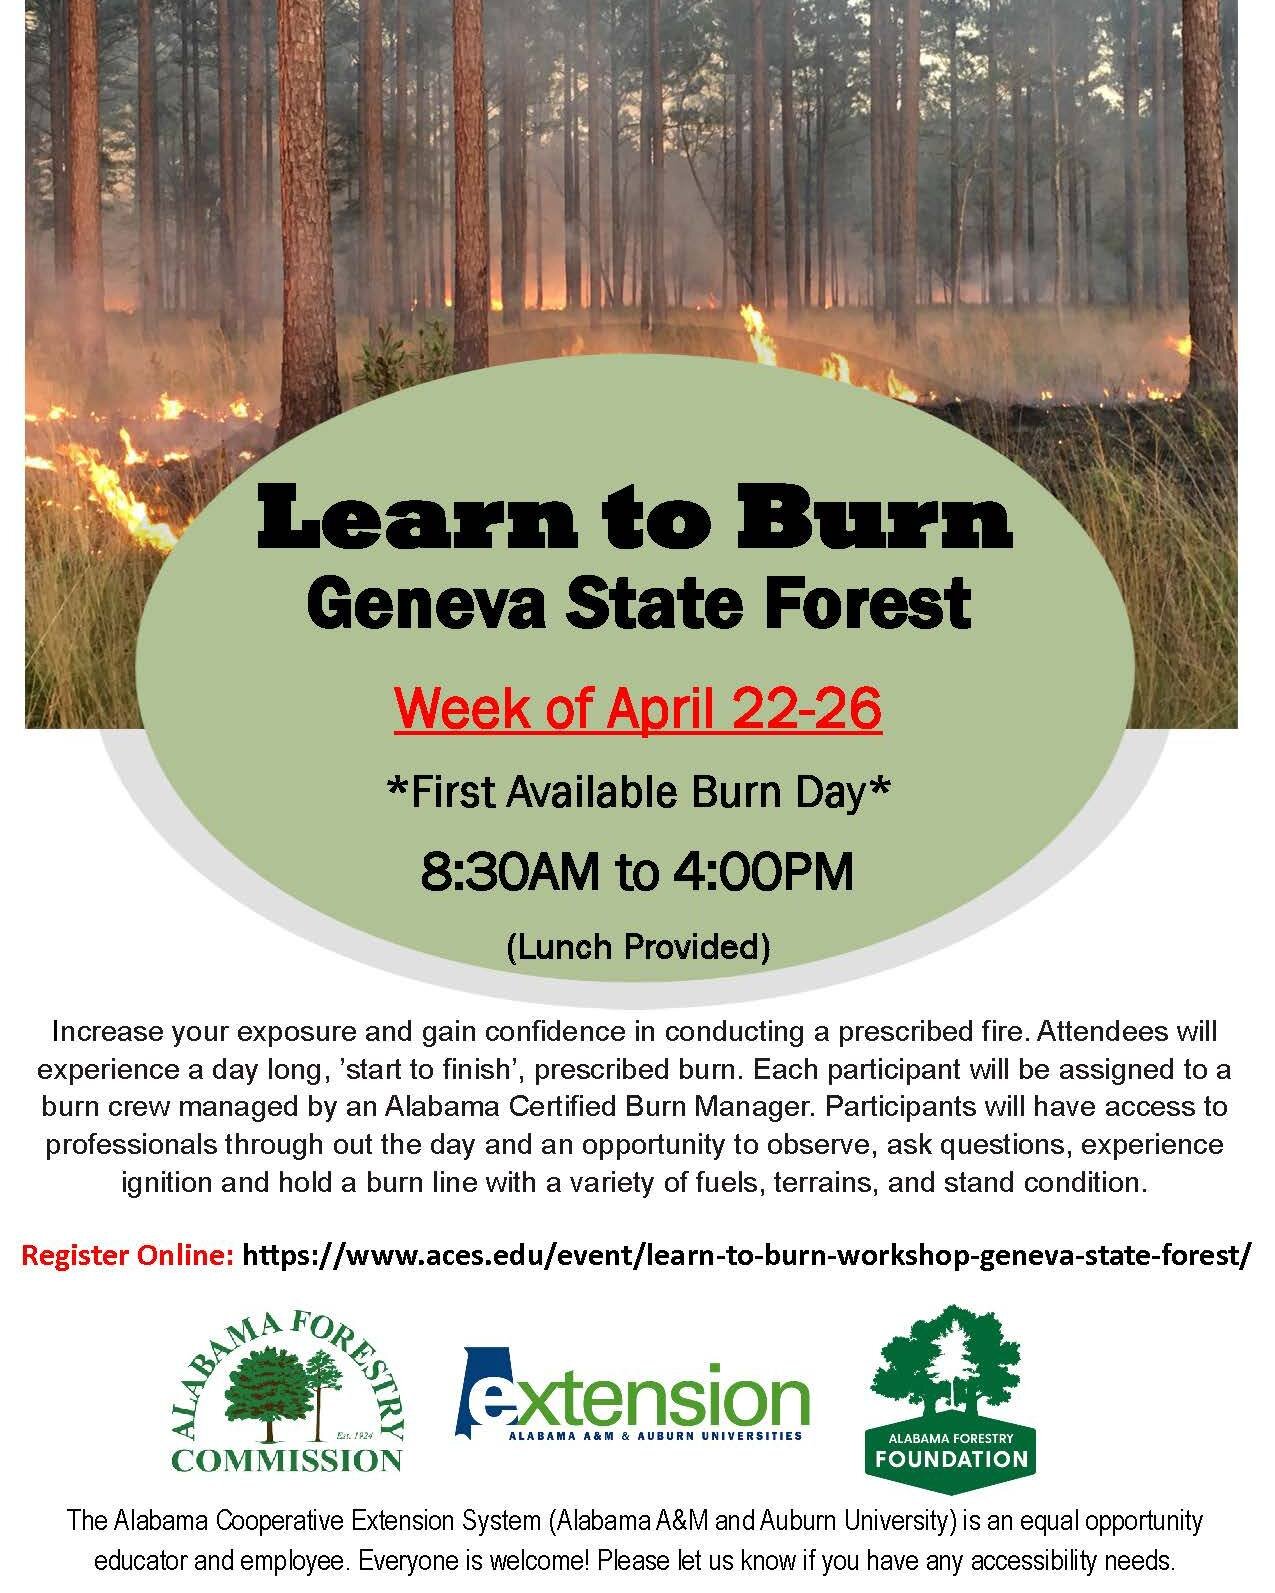 Learn to Burn on Geneva State Forest provides an opportunity for landowners to gain exposure and experience with prescribed fire. Register today! 
https://www.aces.edu/event/learn-to-burn-workshop-geneva-state-forest/